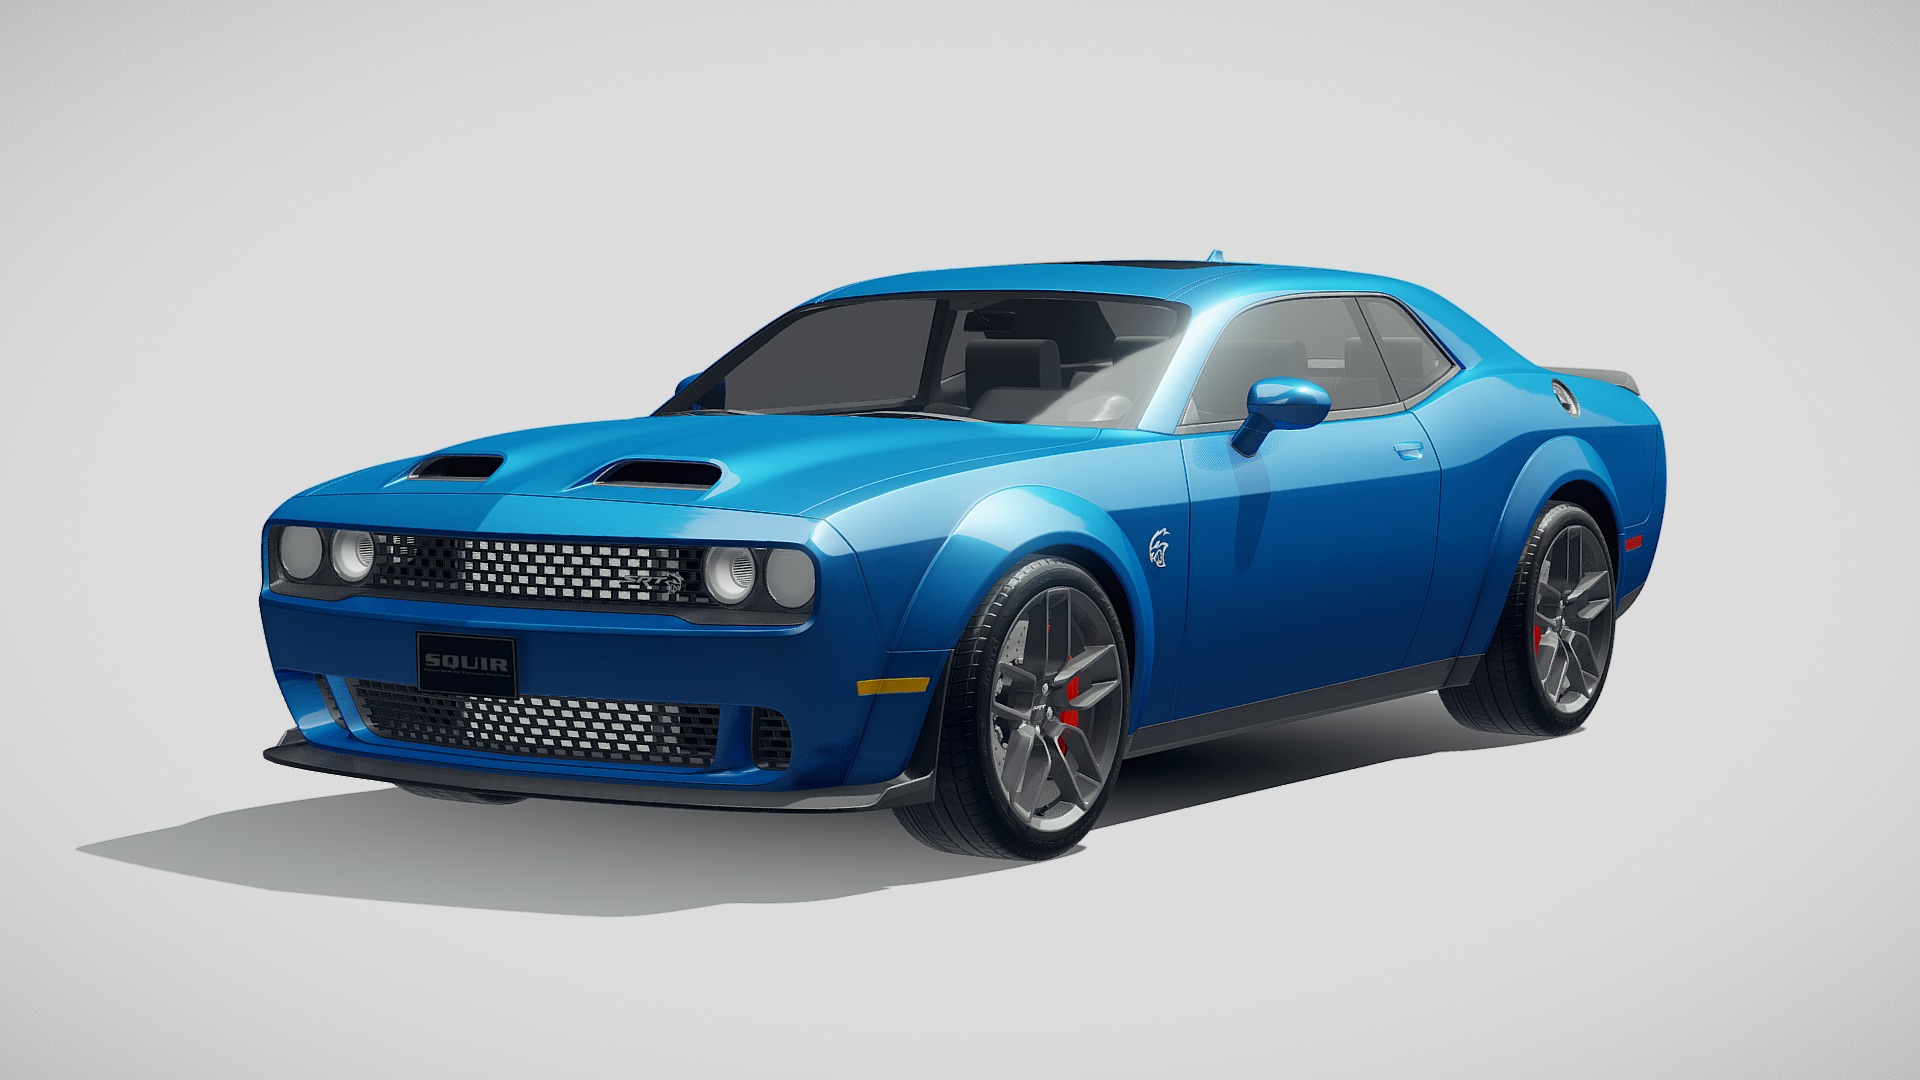 3D model Dodge Challenger SRT Hellcat 2019 - This is a 3D model of the Dodge Challenger SRT Hellcat 2019. The 3D model is about a blue sports car.